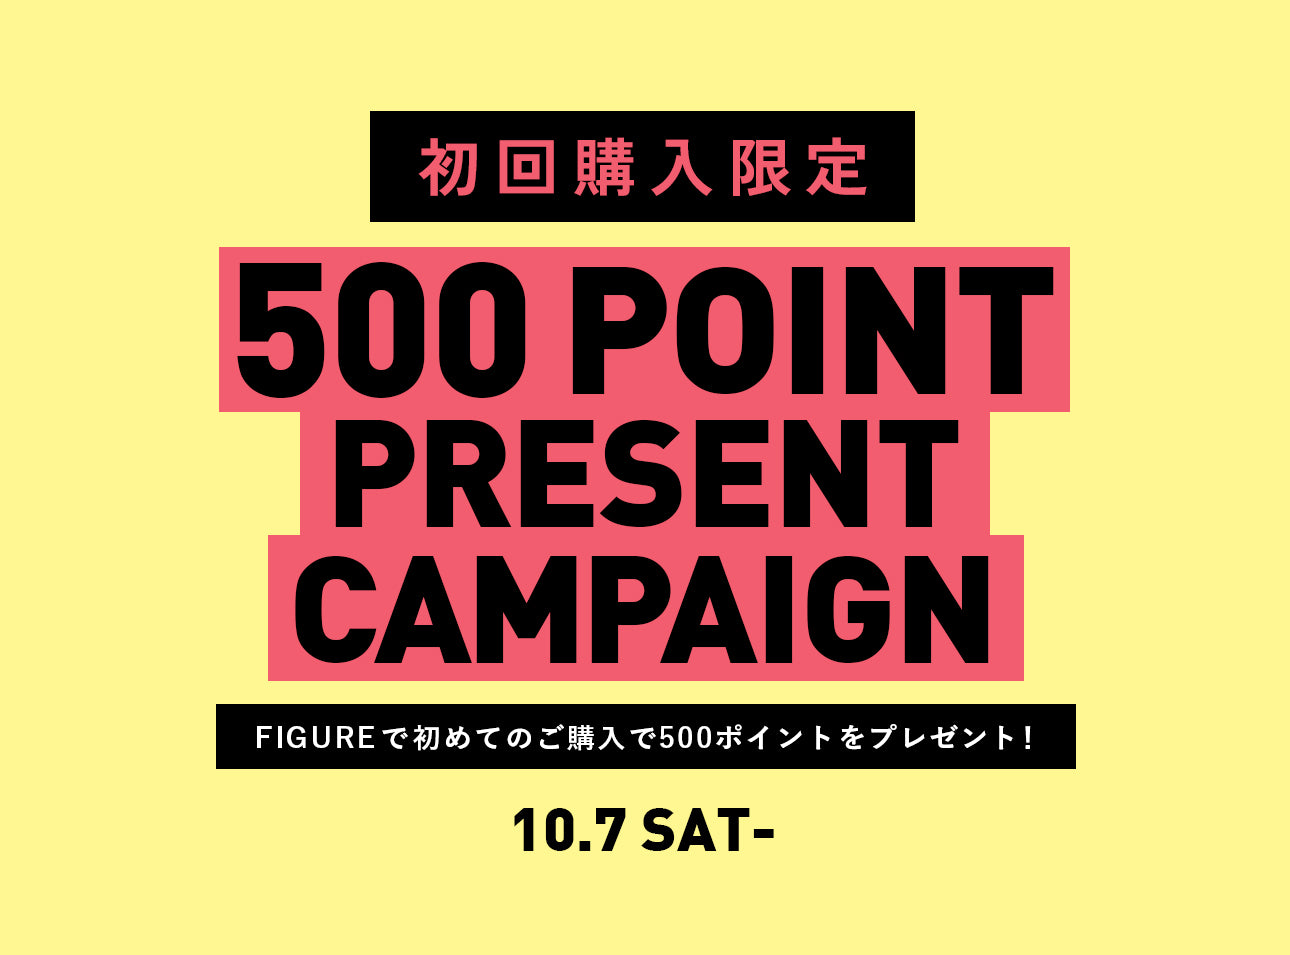 500 POINT PRESENT CAMPAIGN